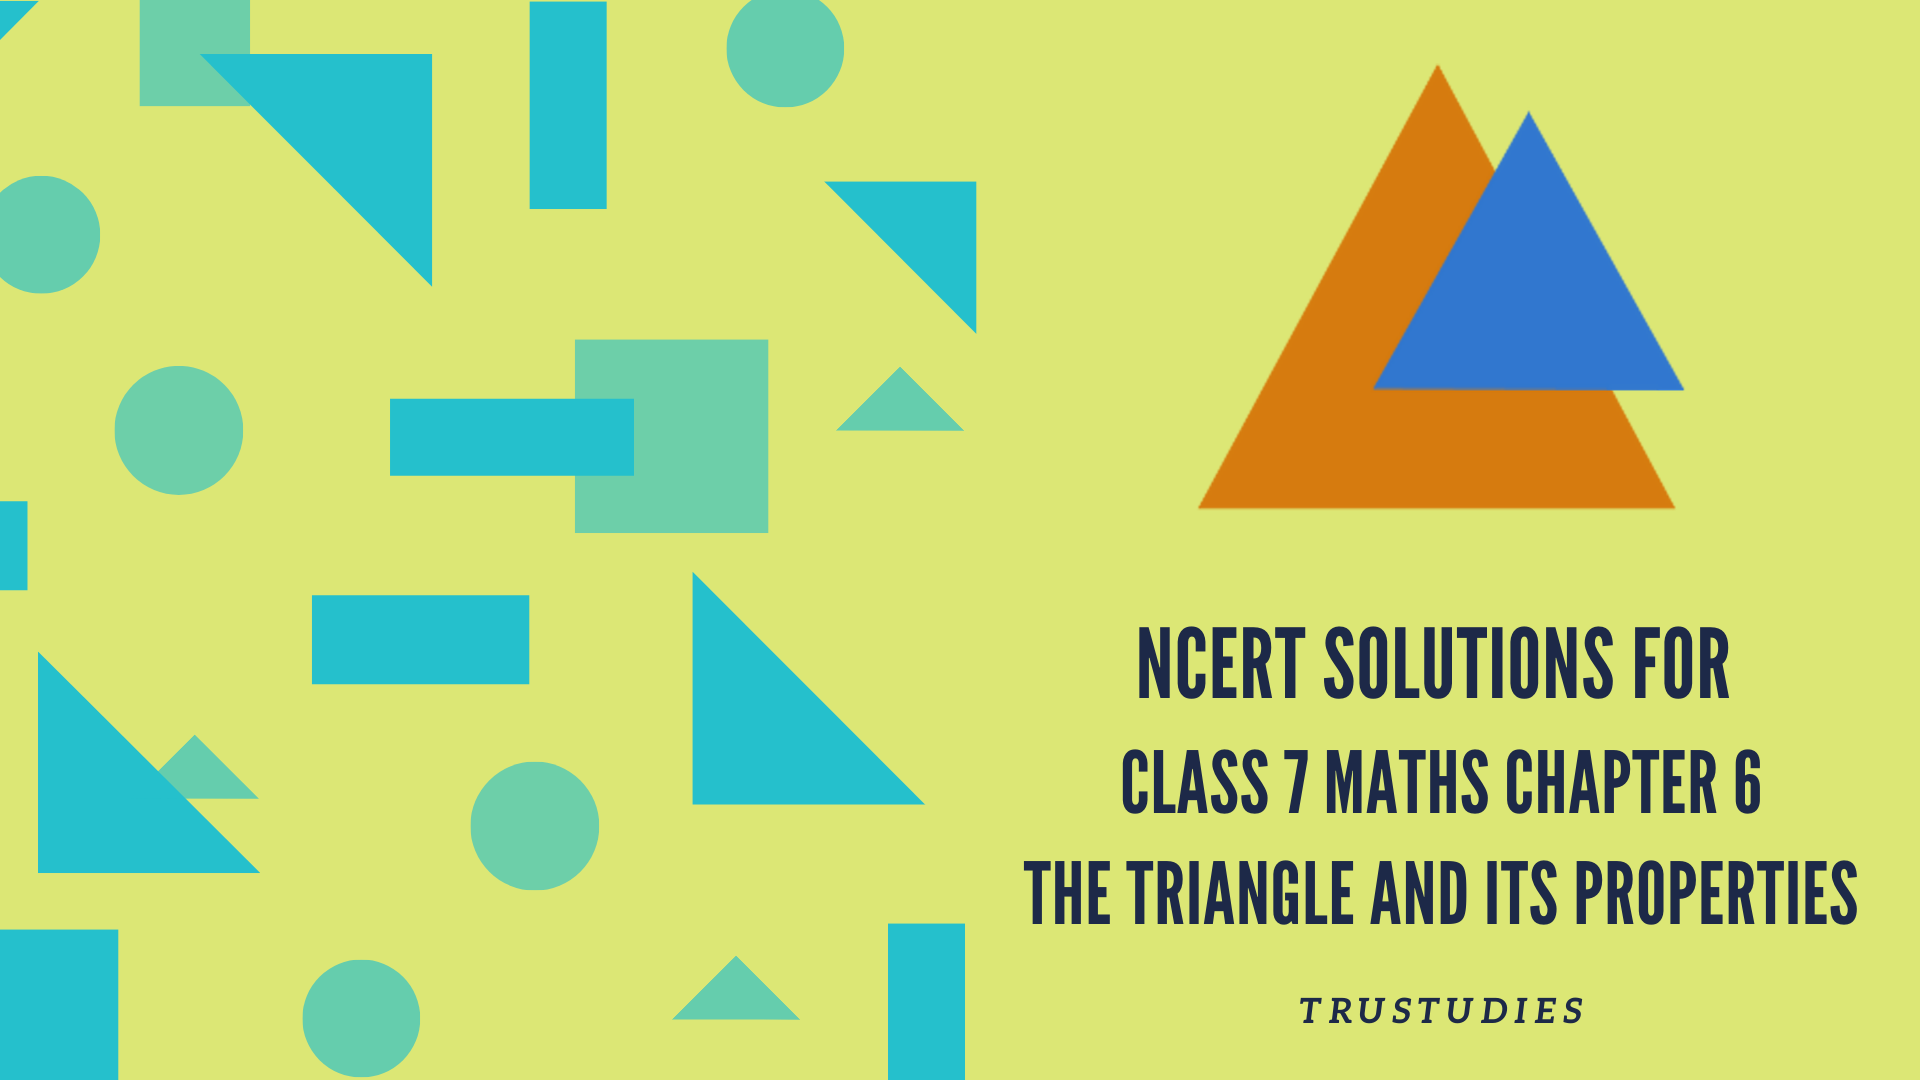 NCERT solutions for class 7 maths chapter 6 the triangle and its properties banner image